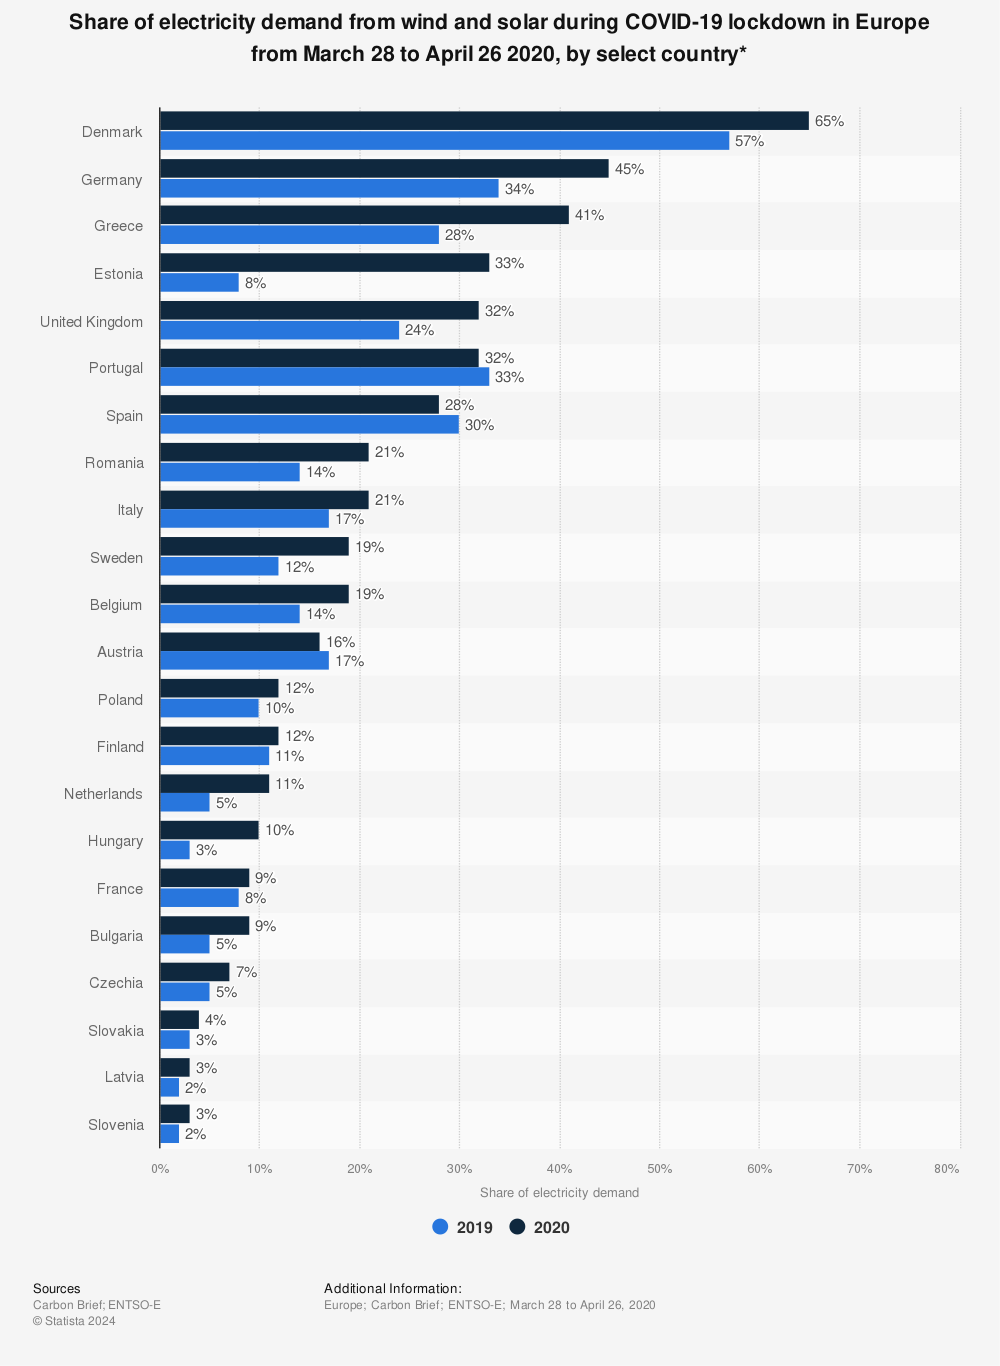 Statistic: Share of electricity demand from wind and solar during COVID-19 lockdown in Europe from March 28 to April 26 2020, by select country* | Statista